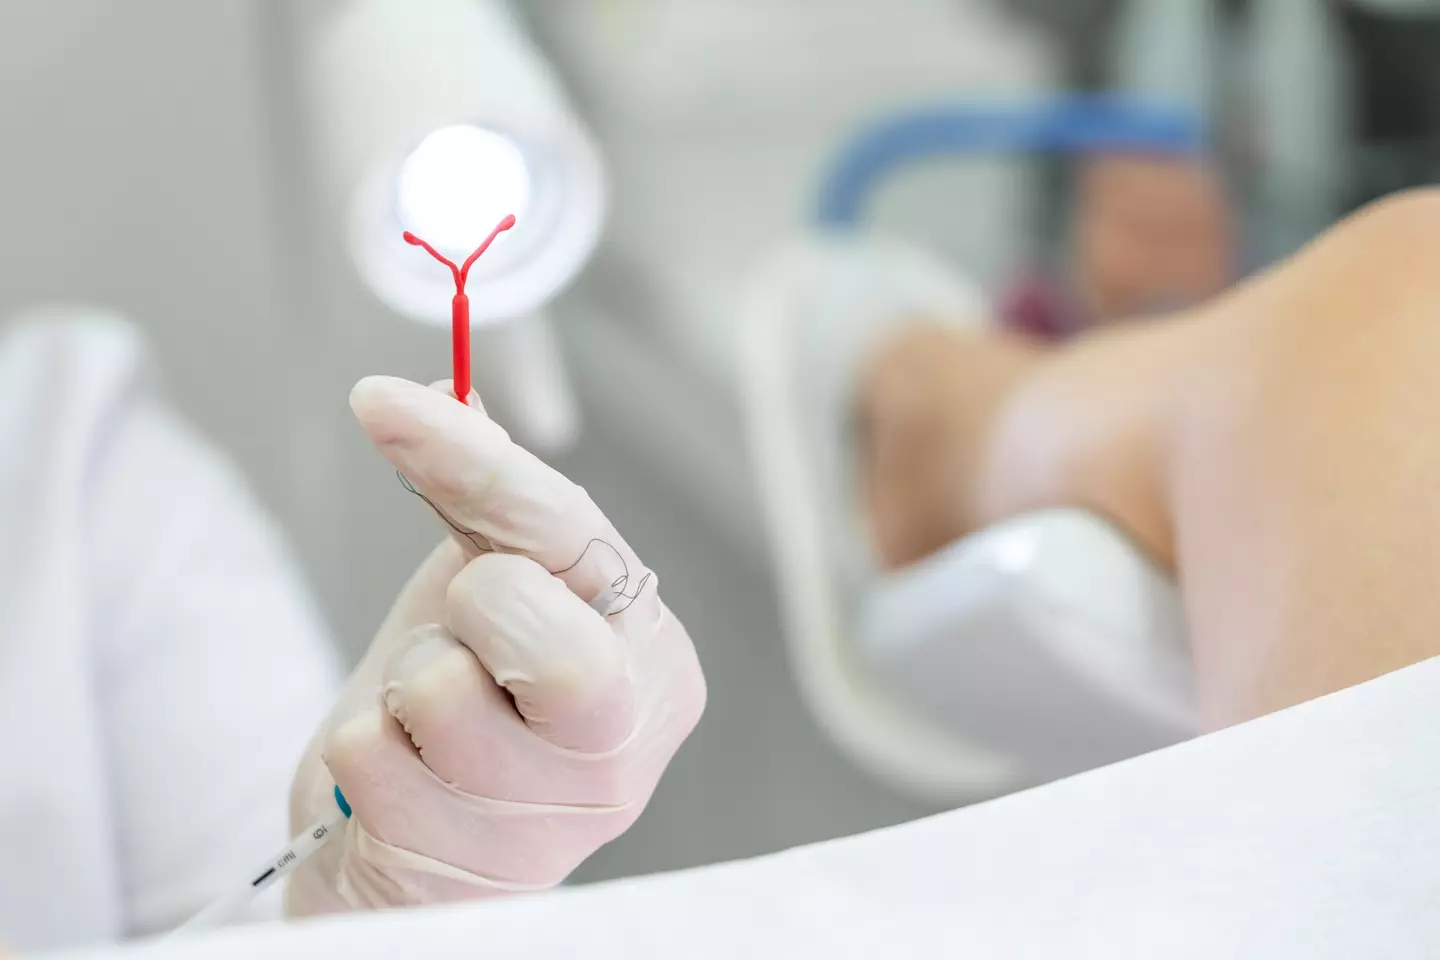 The video shows how an IUD is inserted (